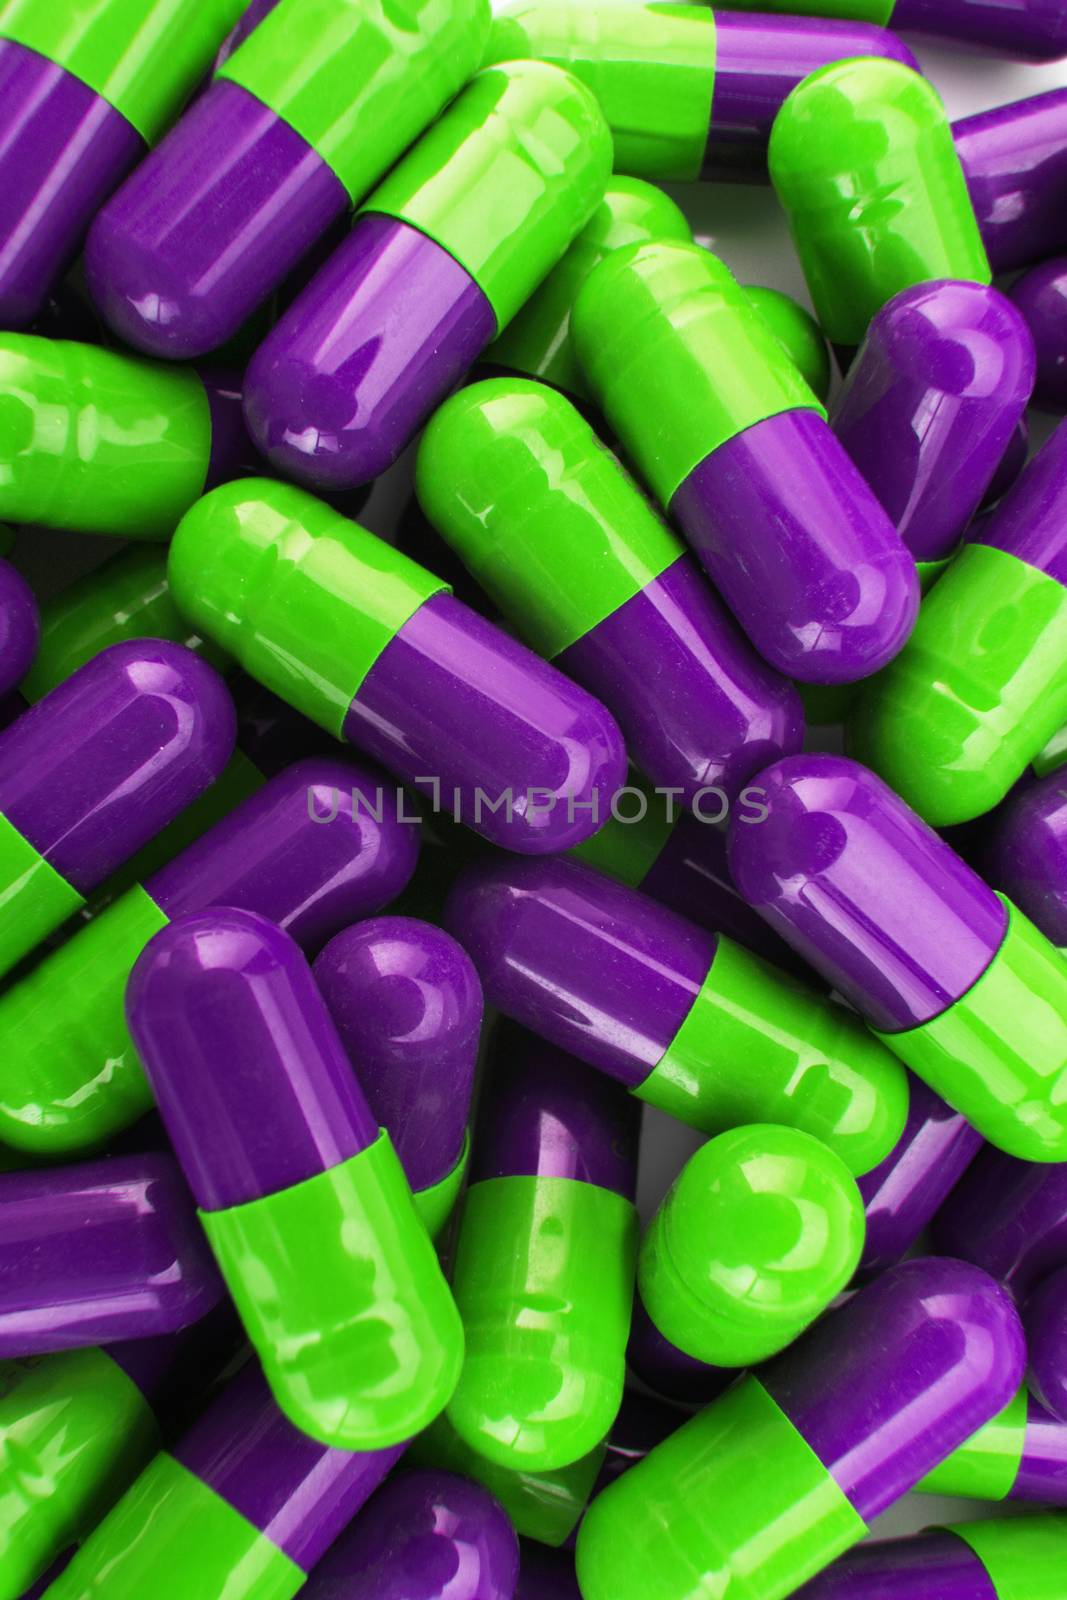 A pile of green and purple capsual pills